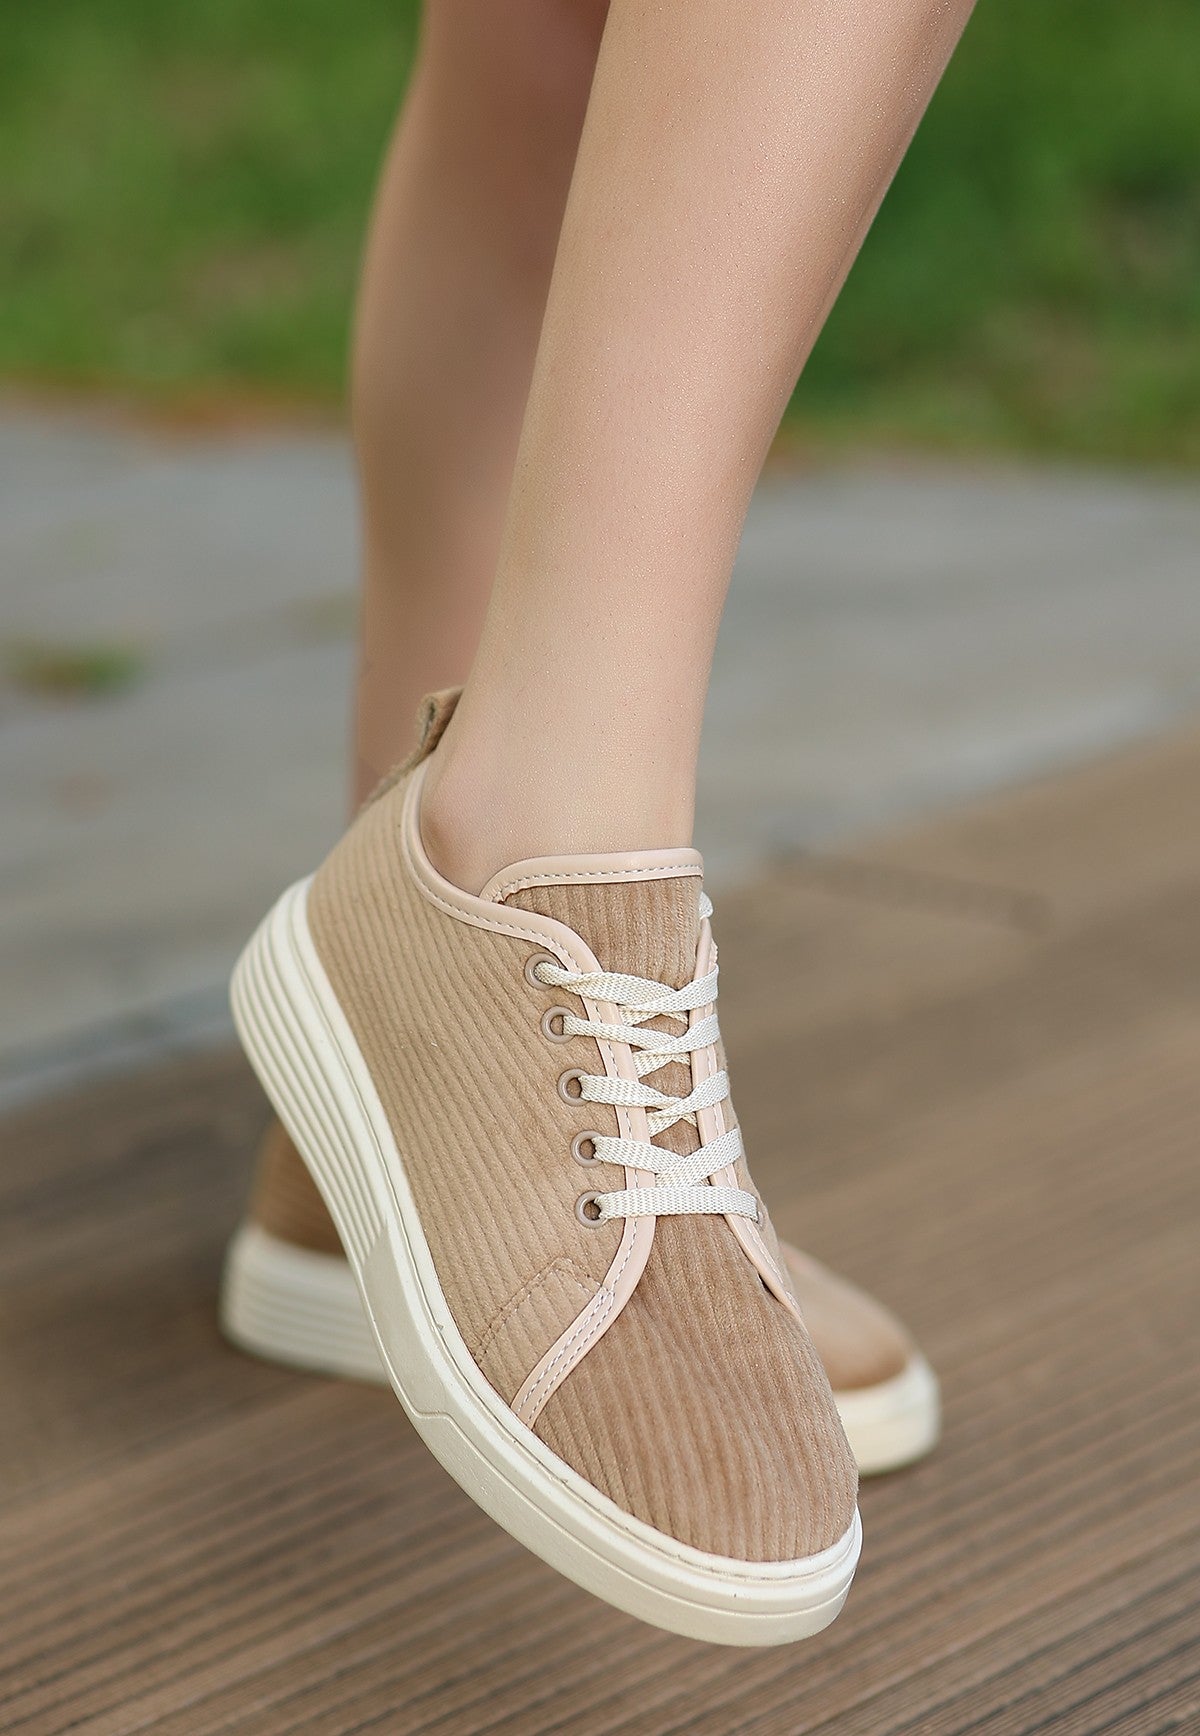 Women's Aprel Nude Velvet Lace-up Sports Shoes - STREETMODE ™